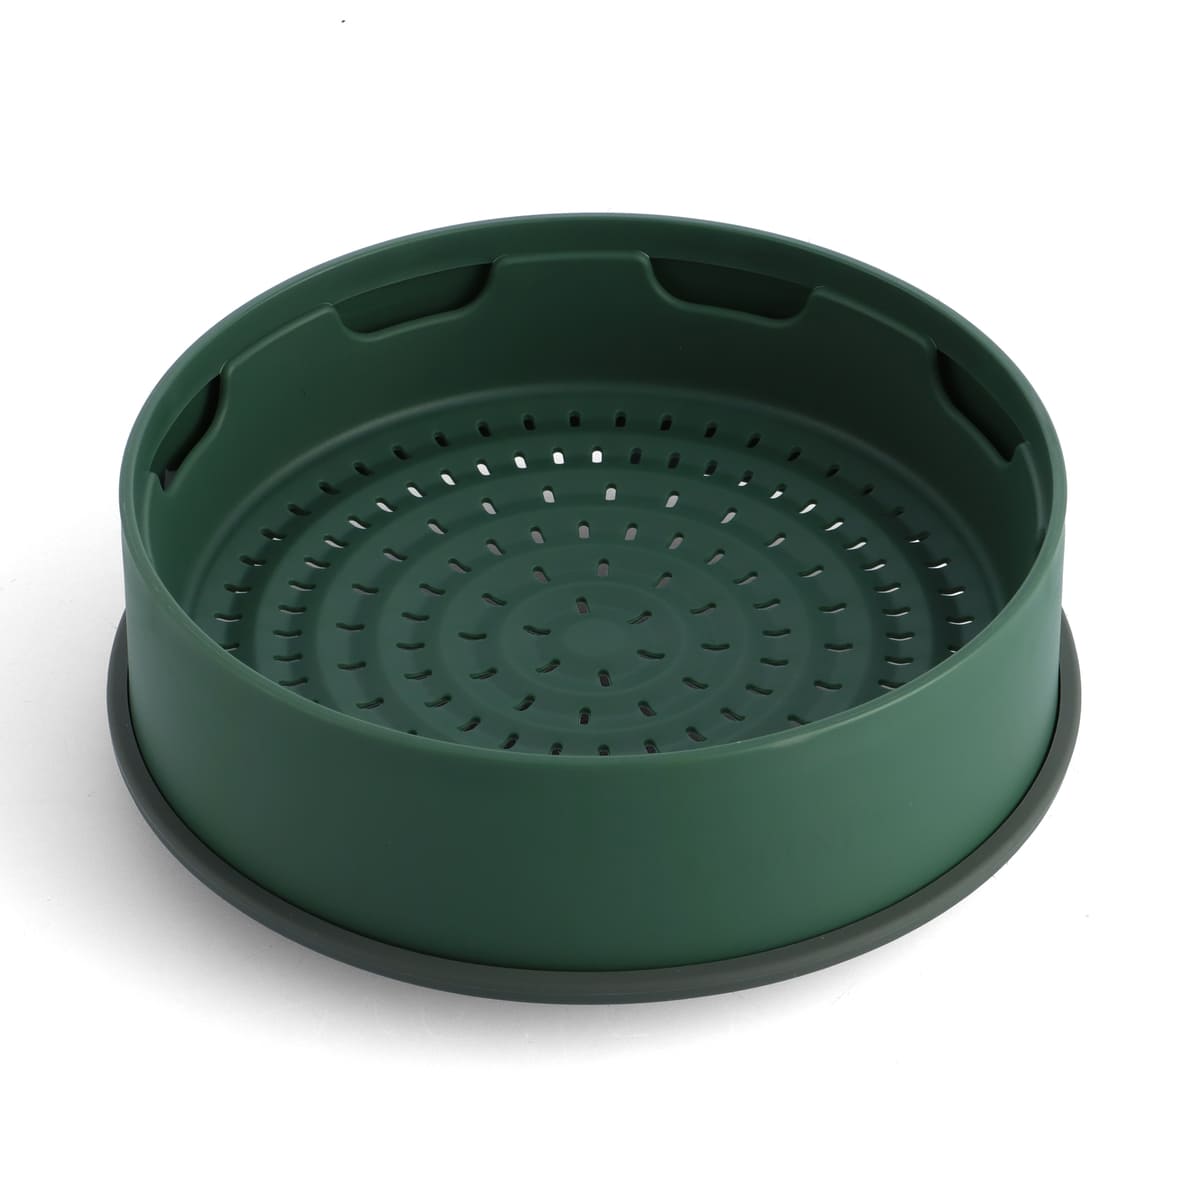 CC006629-001 - Accessories Steamy, Green, 24cm - Product Image 1